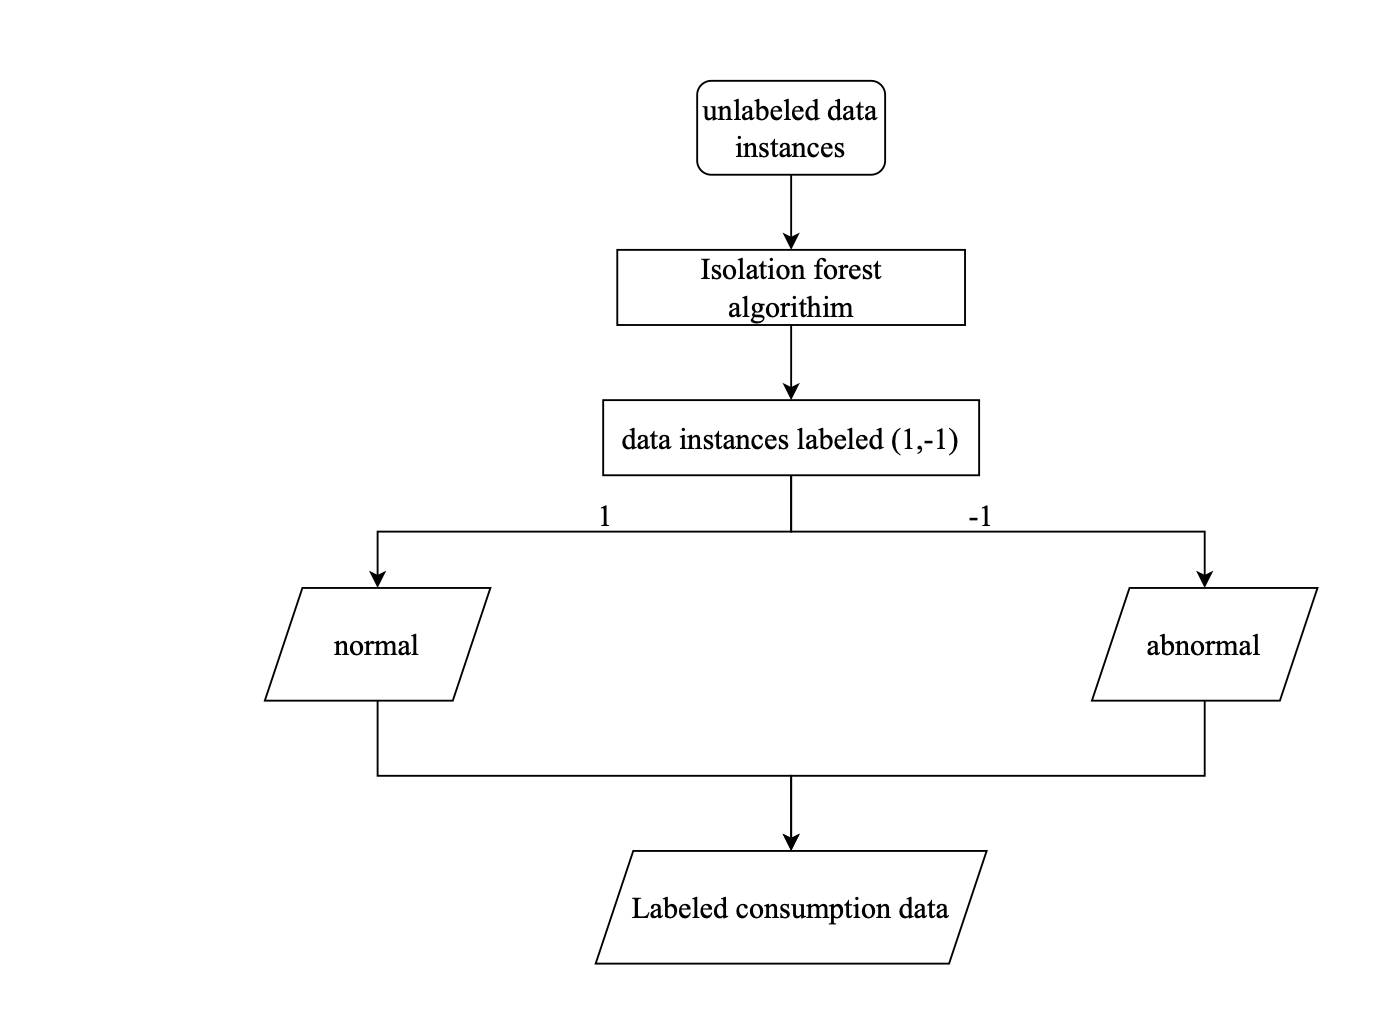 Index terms: Decision Tree; Isolation Forest; Power consumption anomaly; Prediction; Random Forest